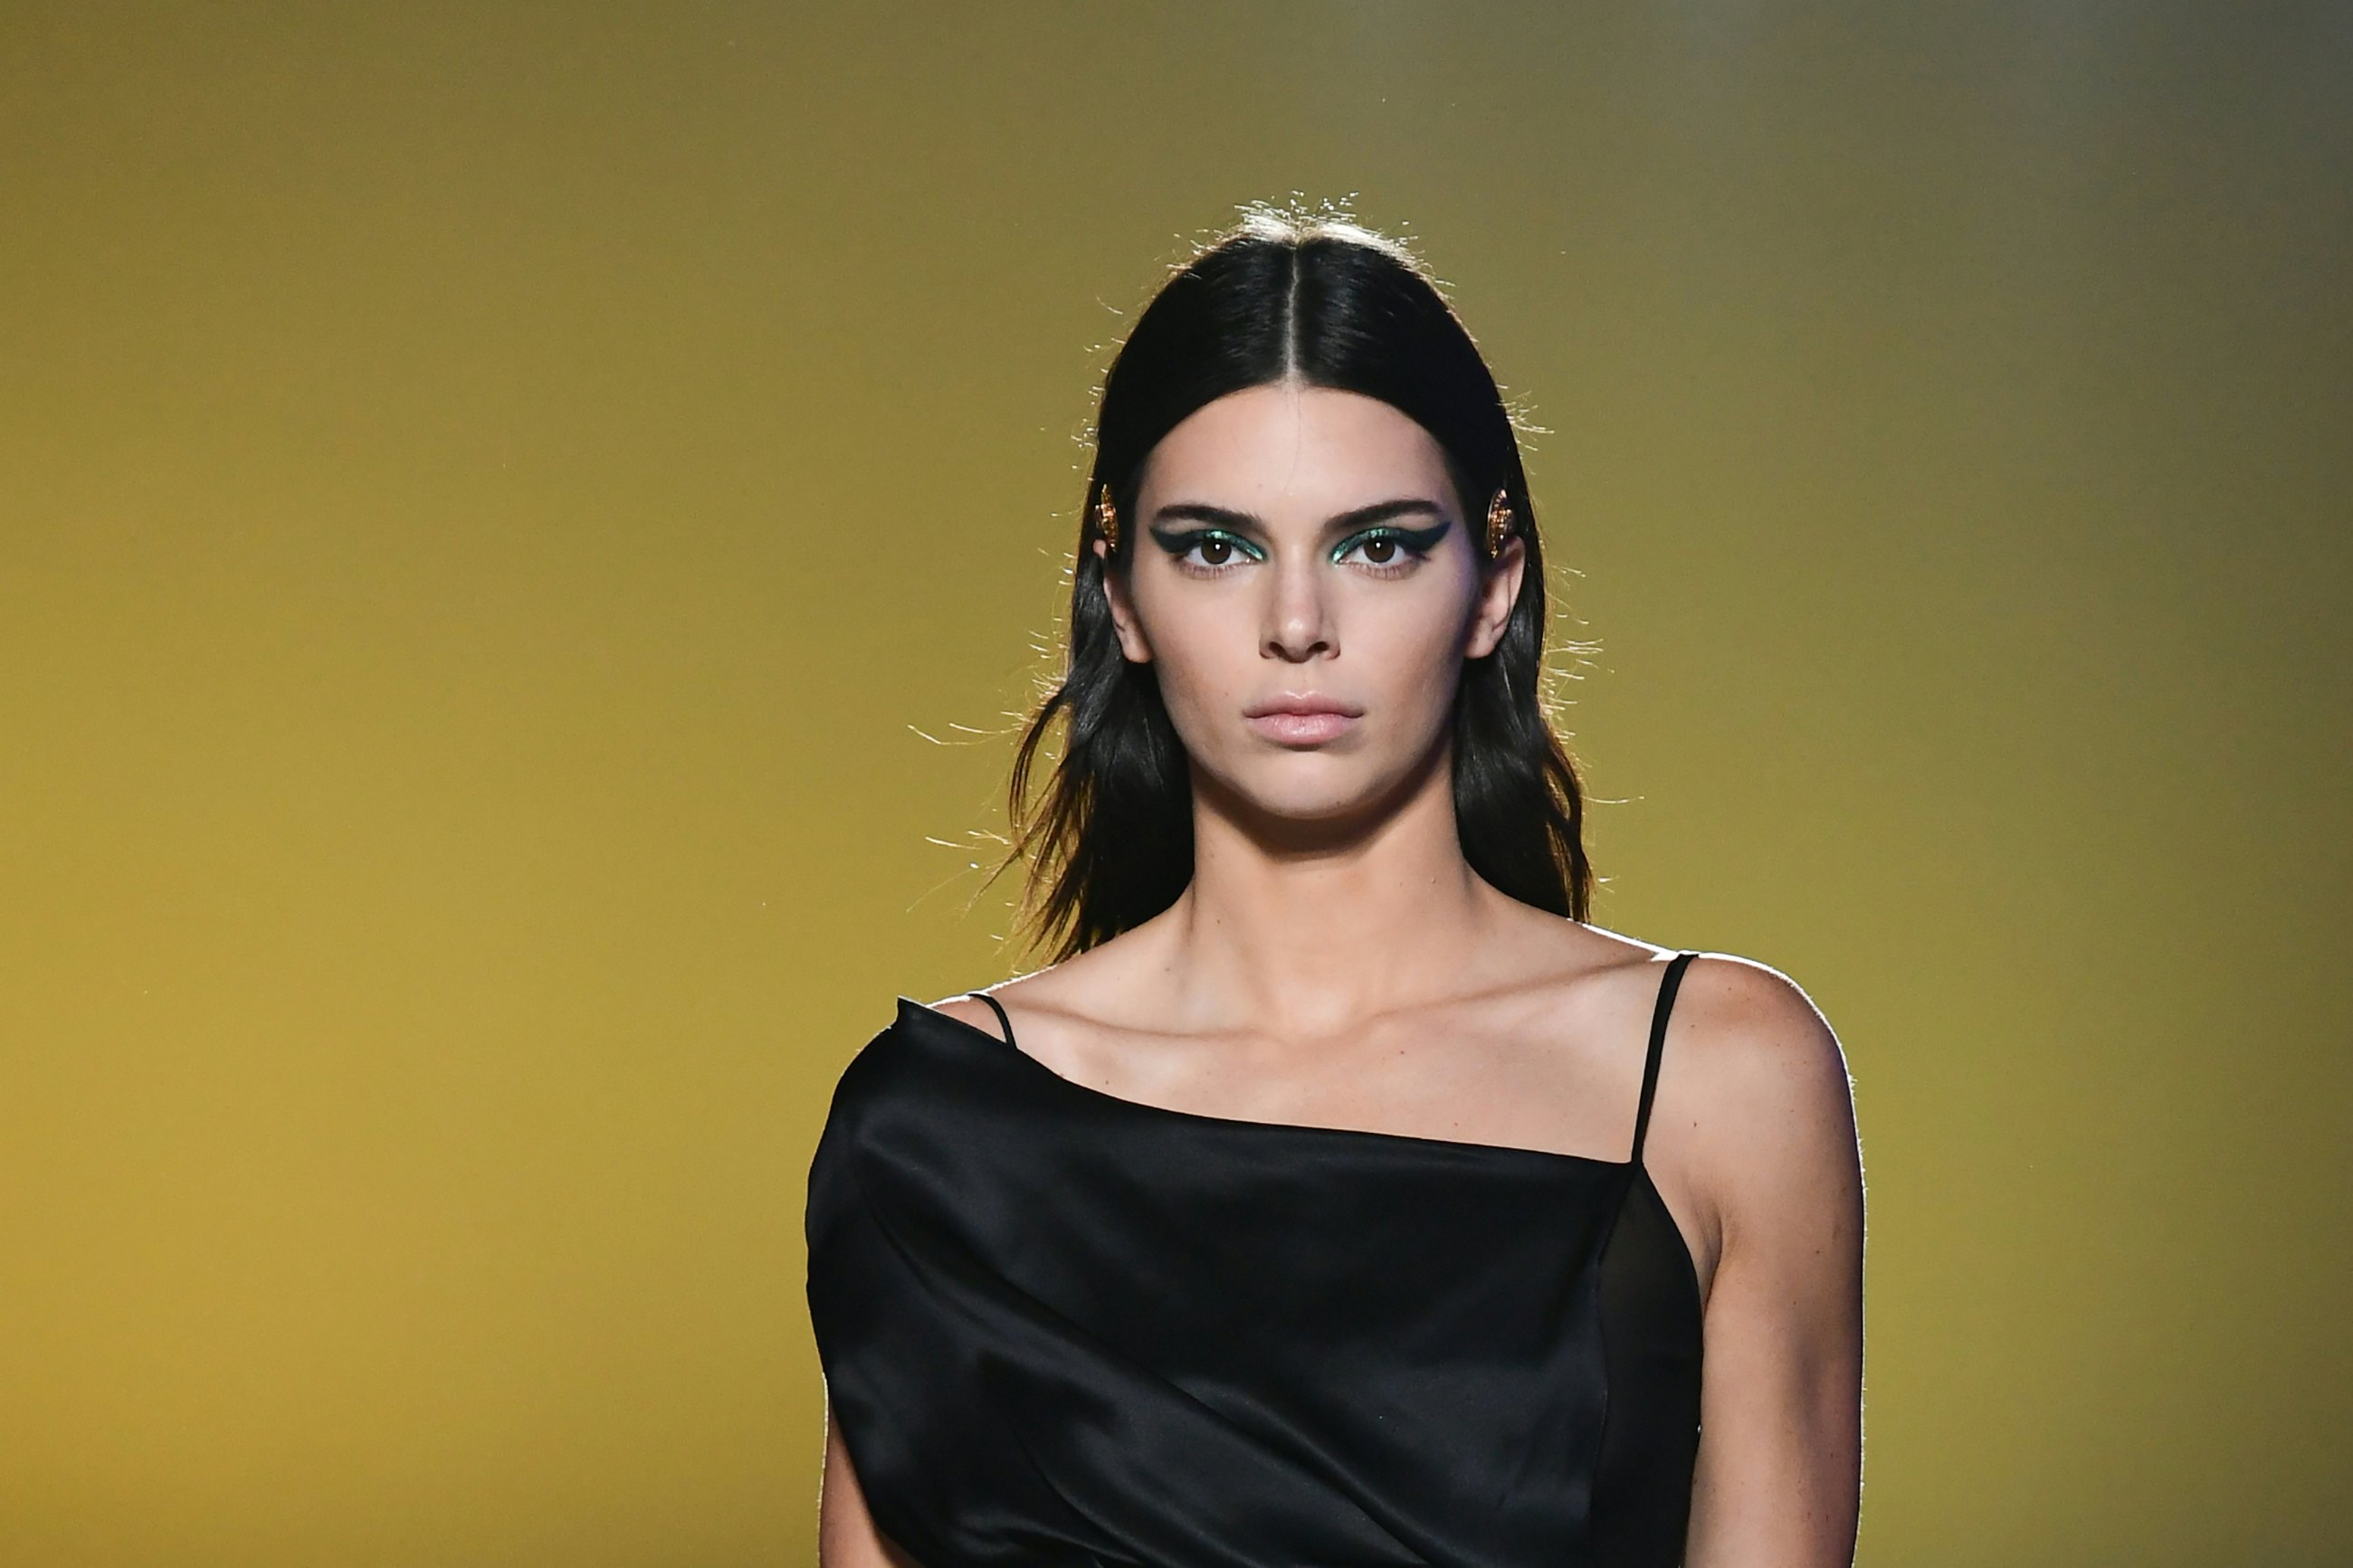 We've never seen Kendall Jenner with such short hair